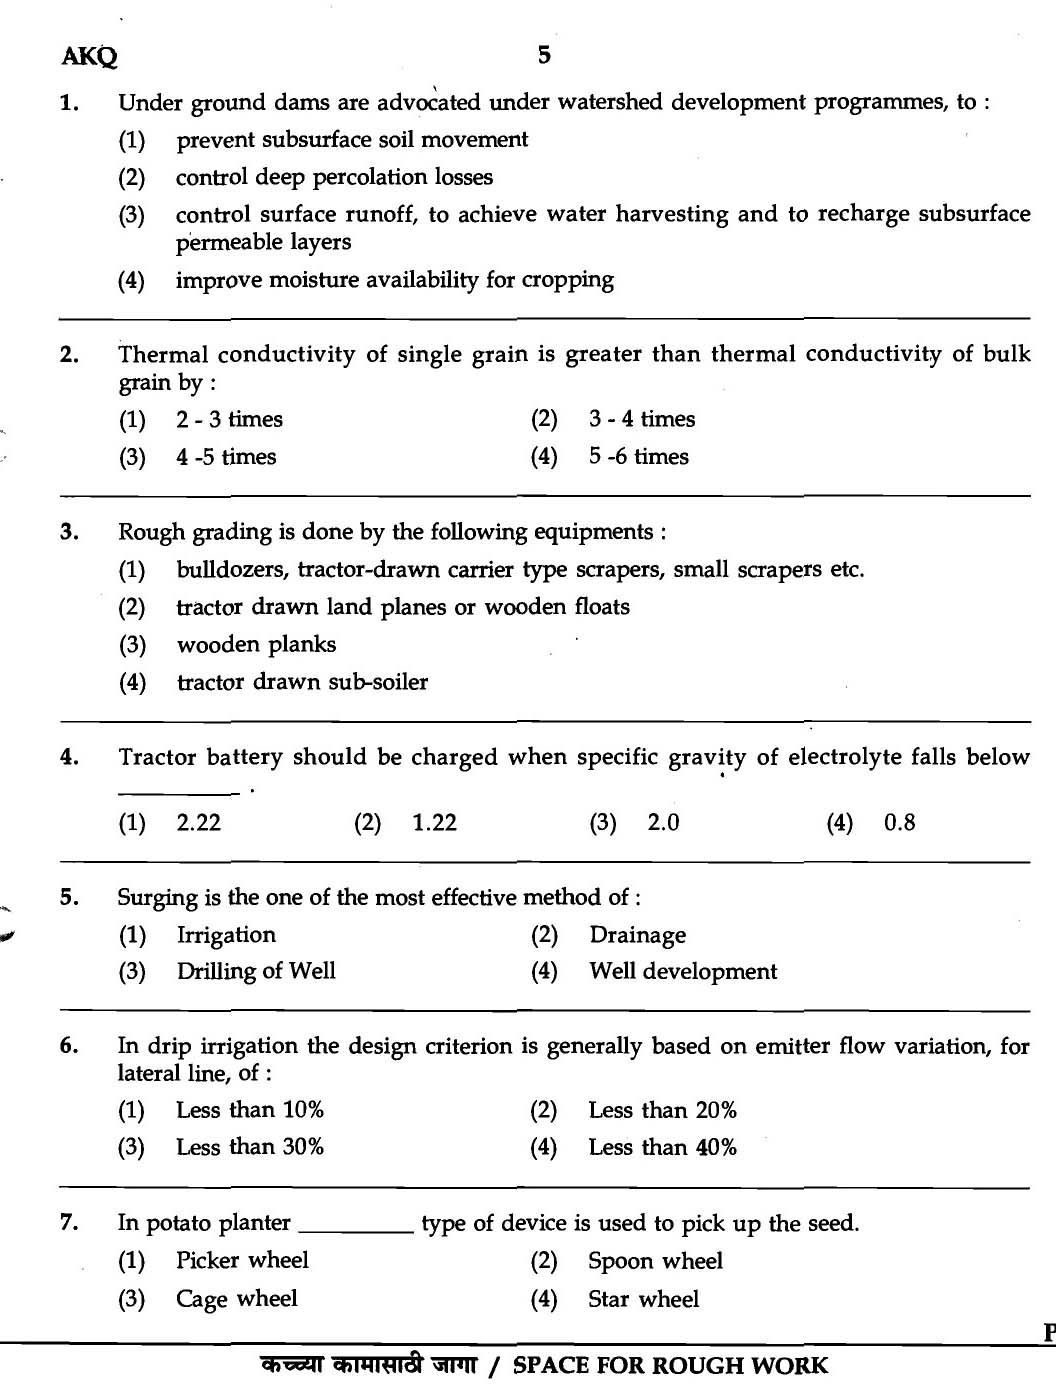 MPSC Agricultural Services Exam 2007 Question Paper Agricultural Engineering 3